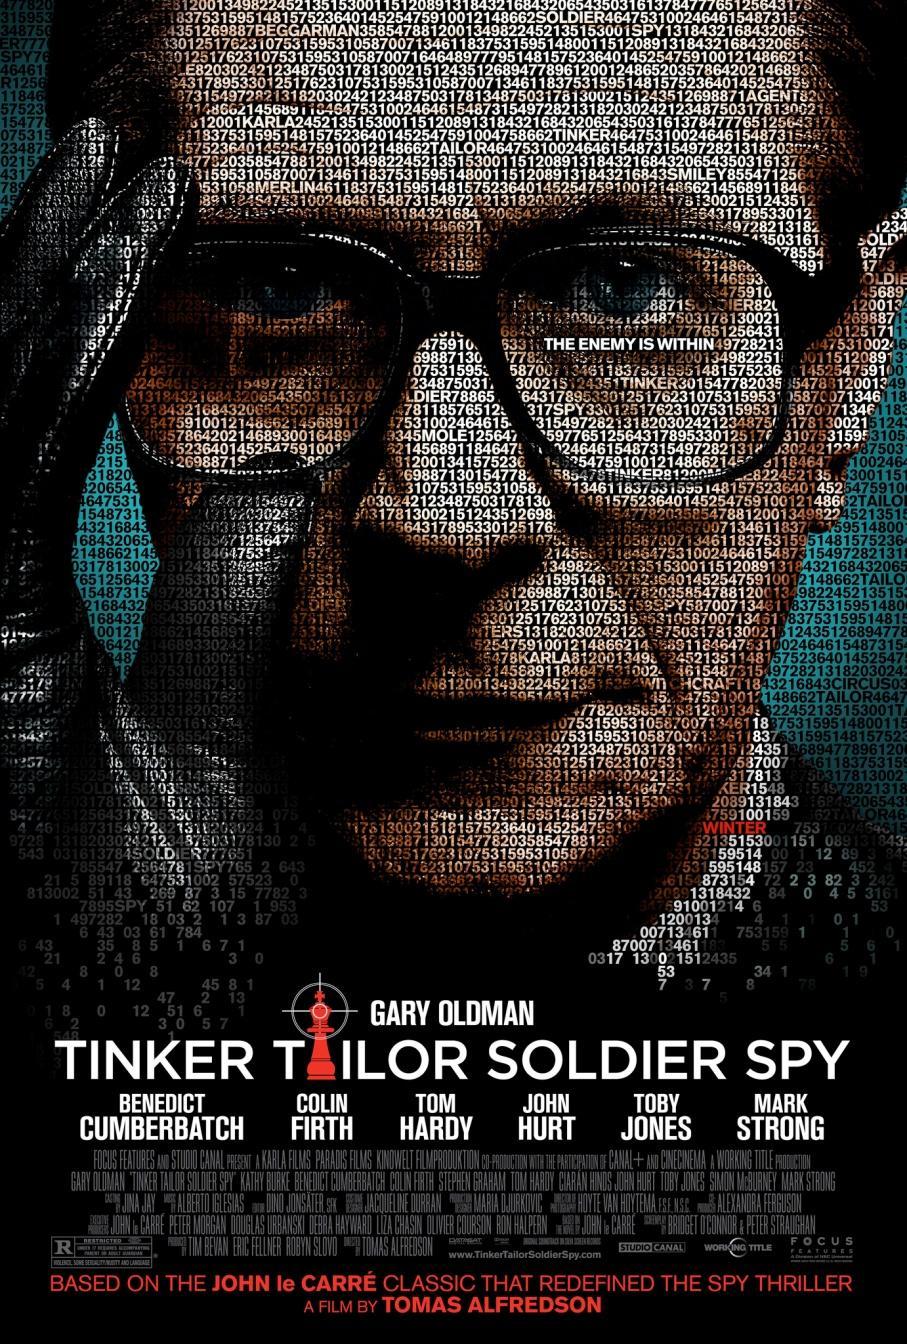 4. Tinker Tailor Soldier Spy Directed by Tomas Alfredson, based on the book by John le Carré. Score by Alberto Iglesias.